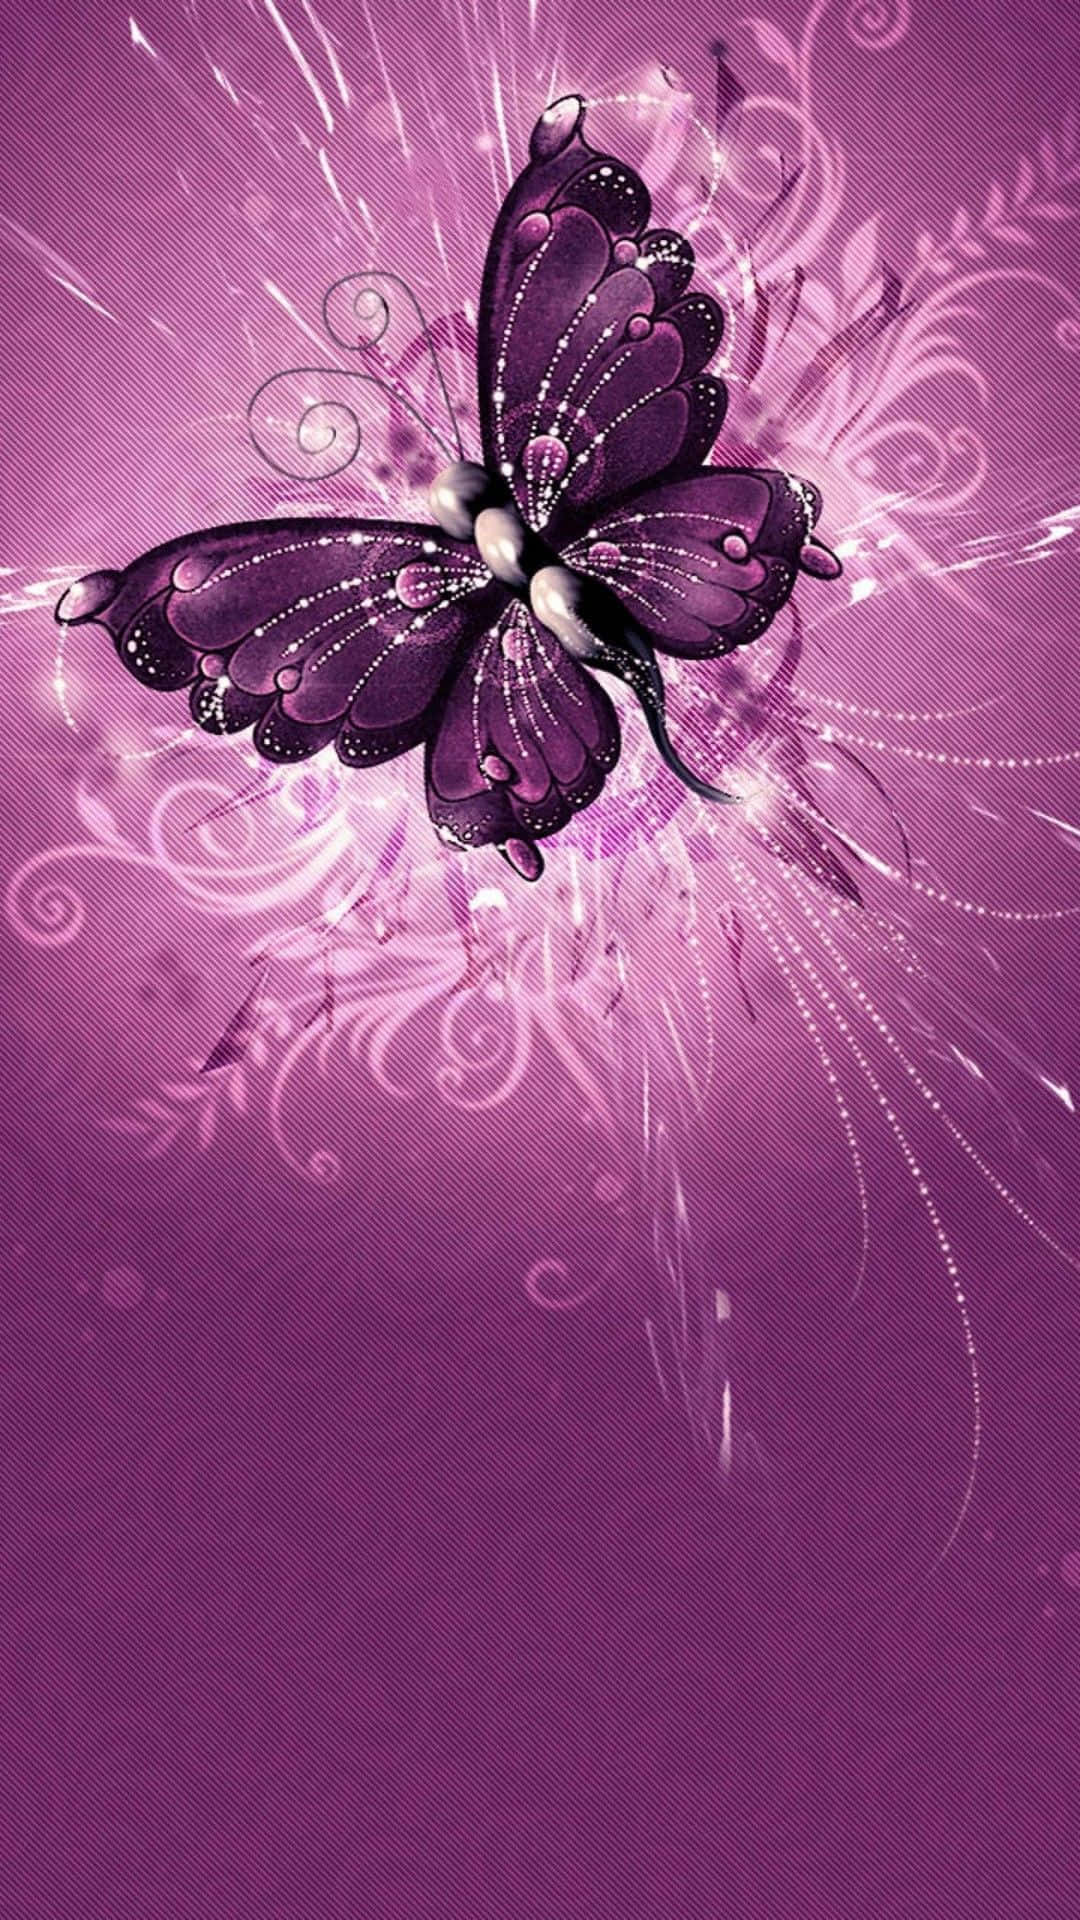 A Colorful Purple Butterfly With Intricate Wings Sitting On A White Flower. Wallpaper